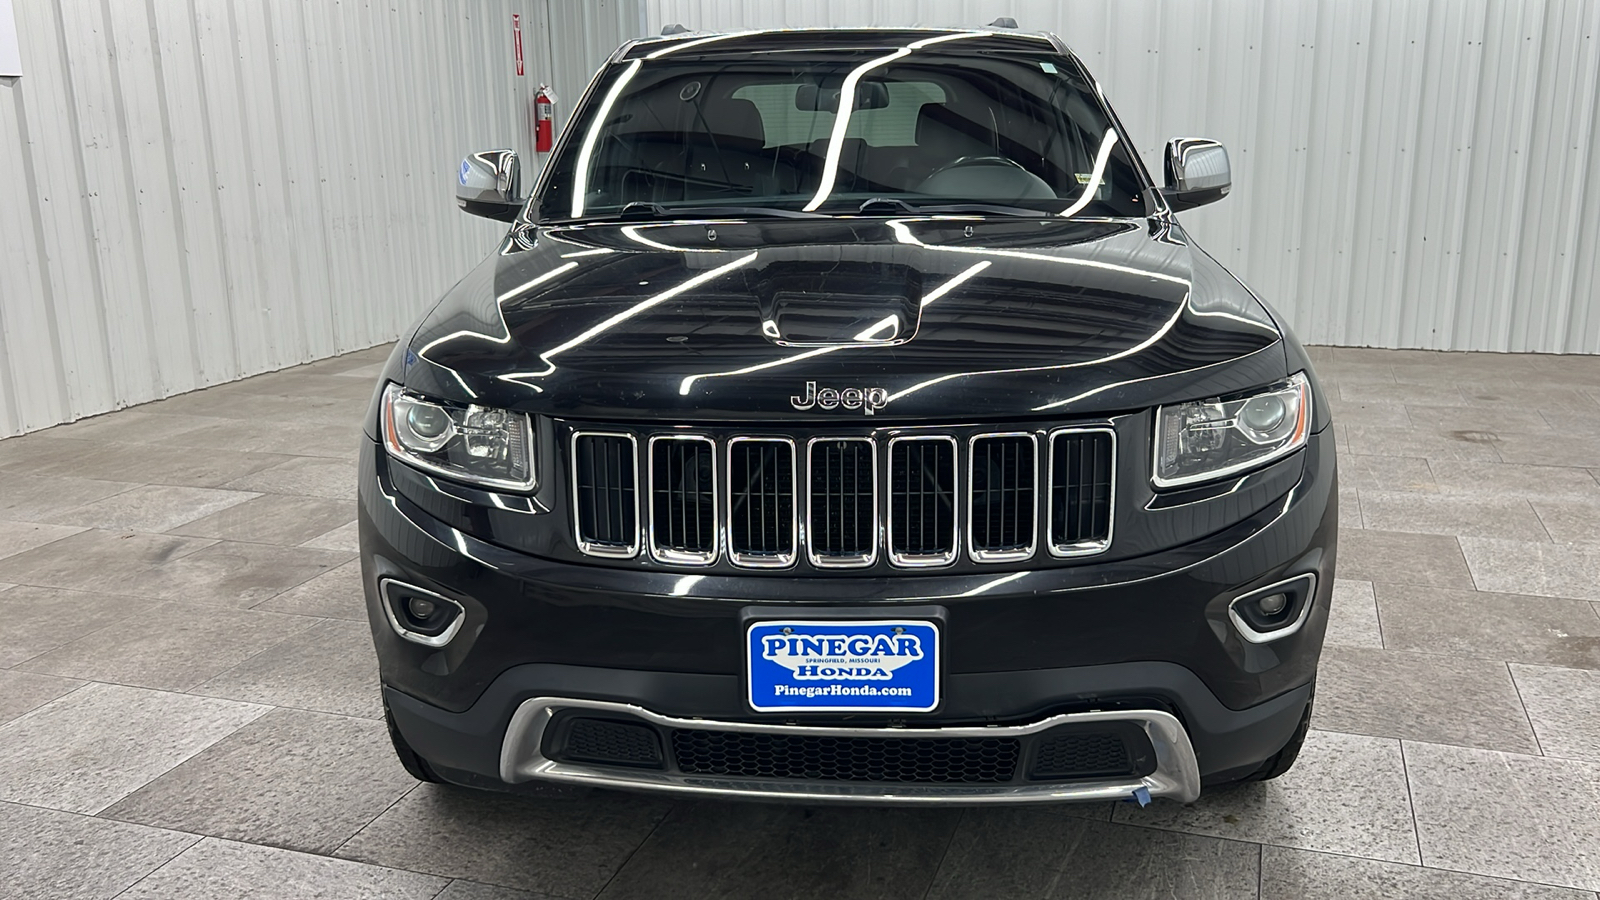 2014 Jeep Grand Cherokee Limited 9